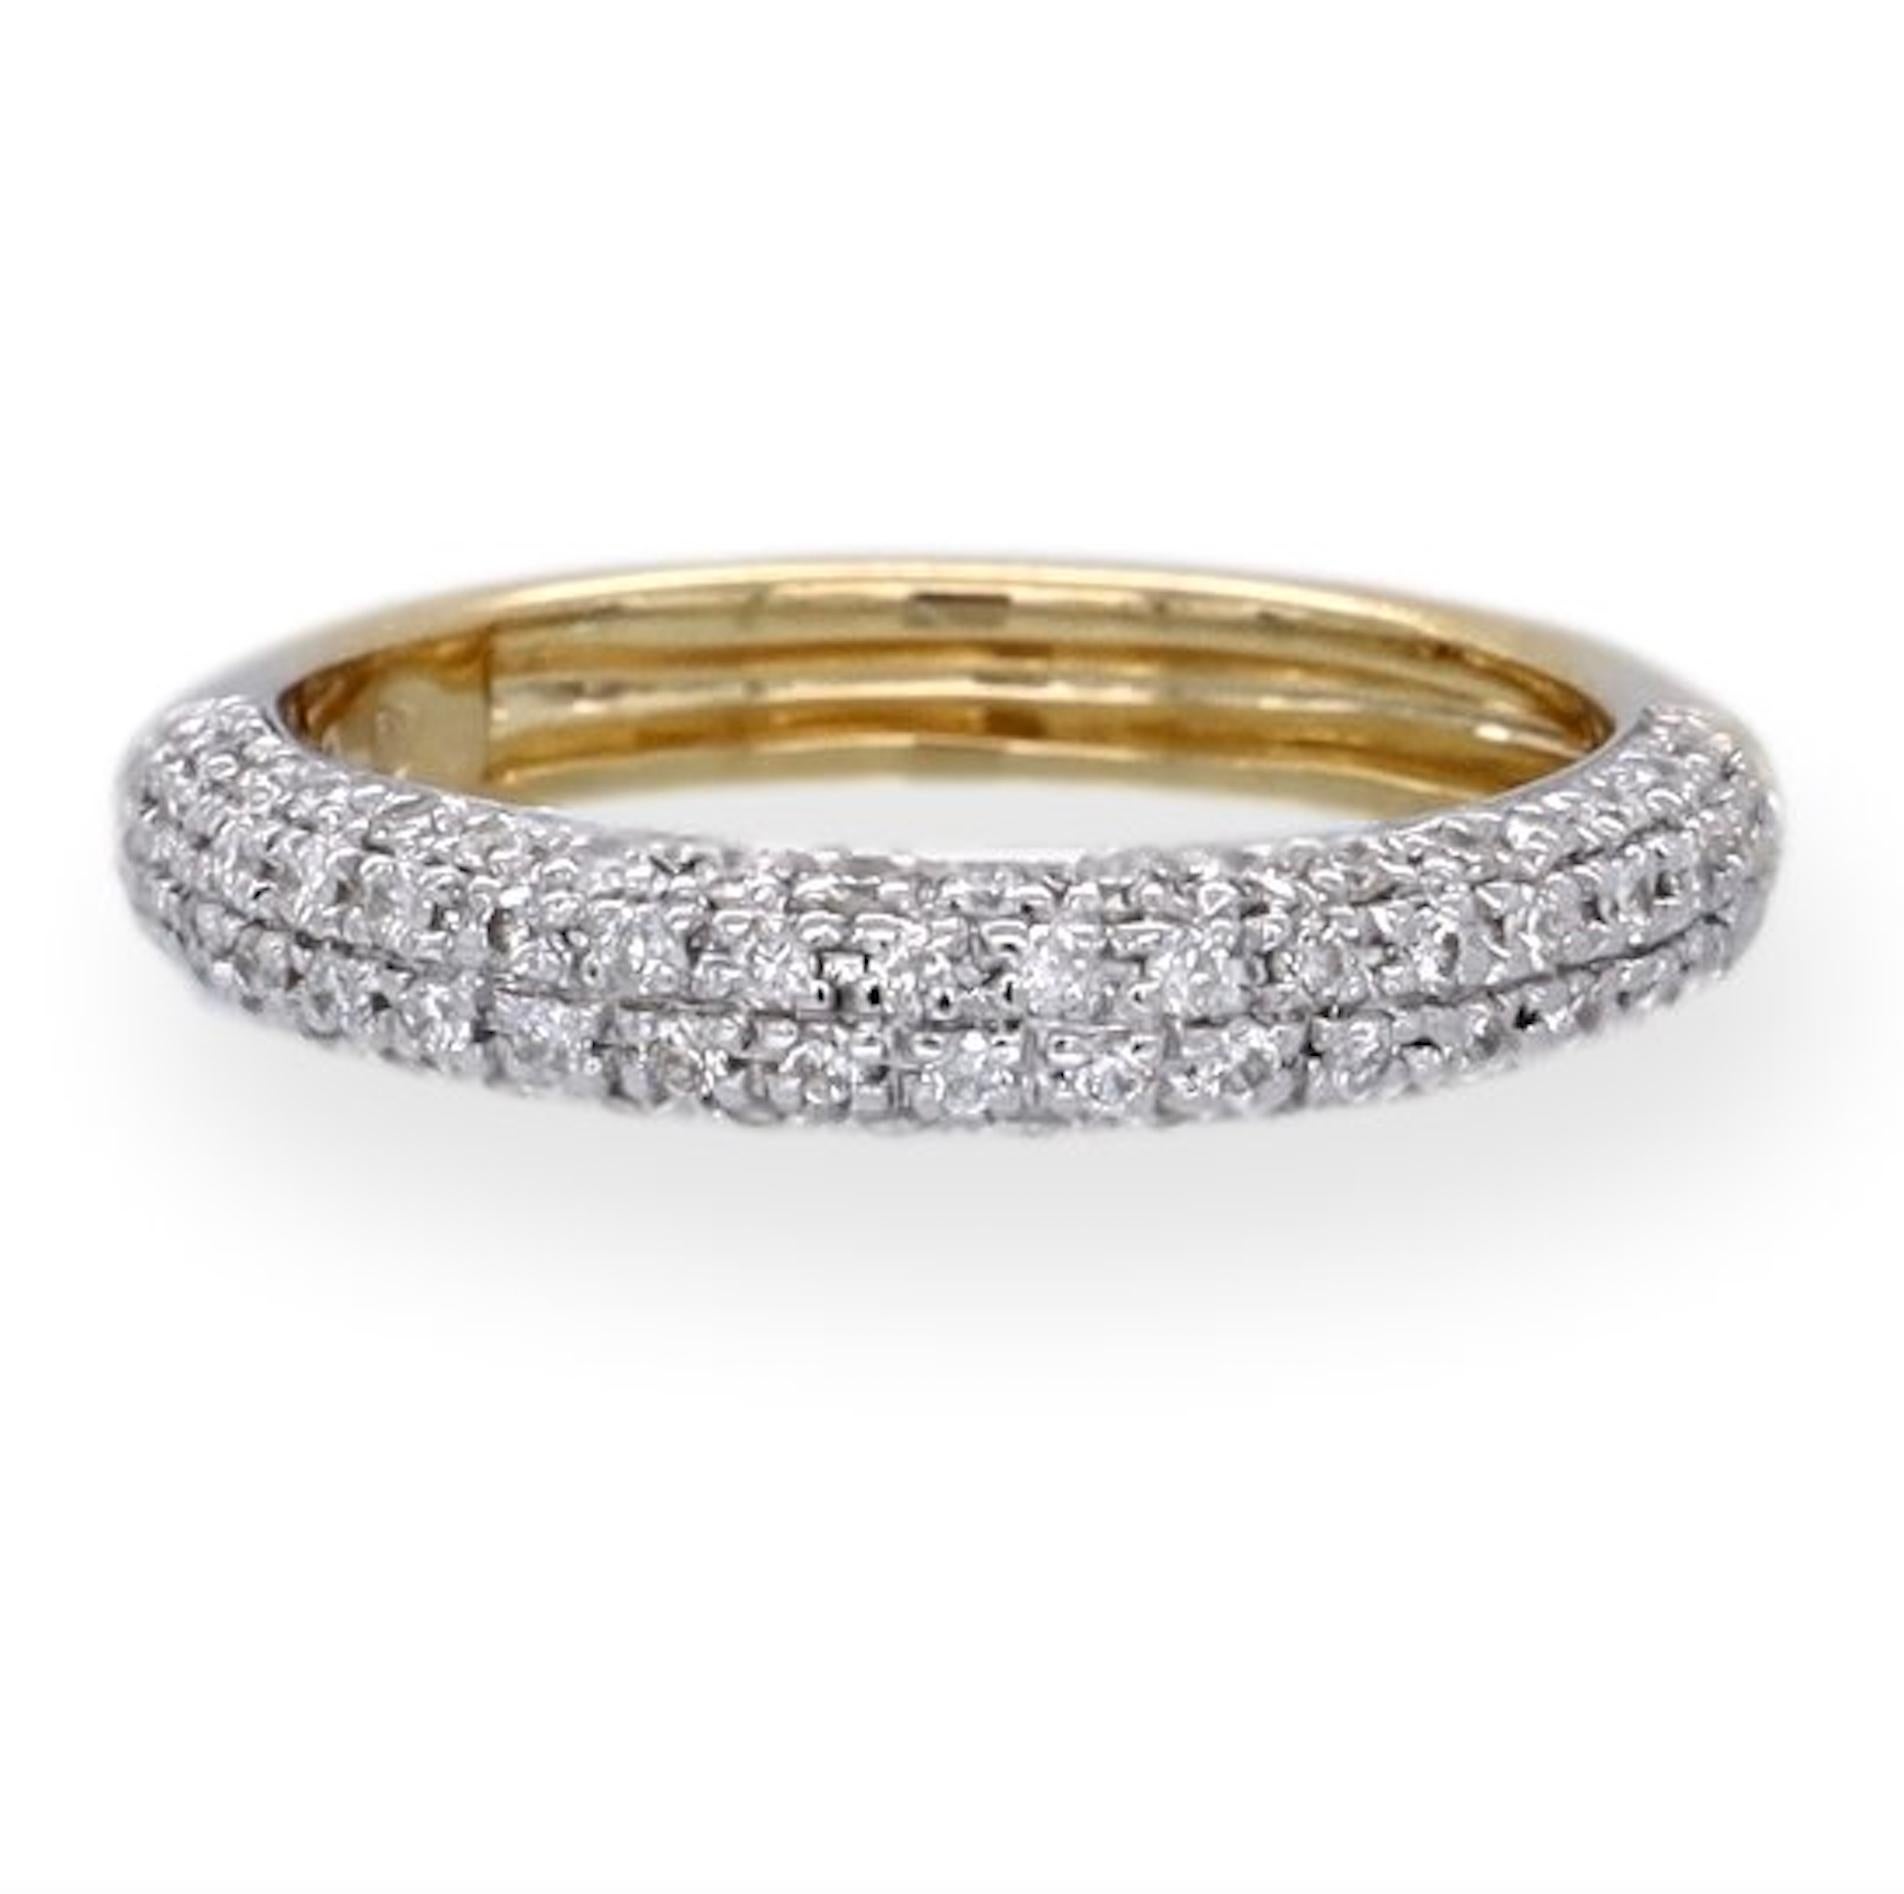 Band ring featuring a stunning combination of white and yellow gold finely crafted in two tone 18 karat gold boasting four rows of round brilliant cut diamonds weighing 0.51 carats total weight approximately, I-J color SI2-I1 clarity set in a pave